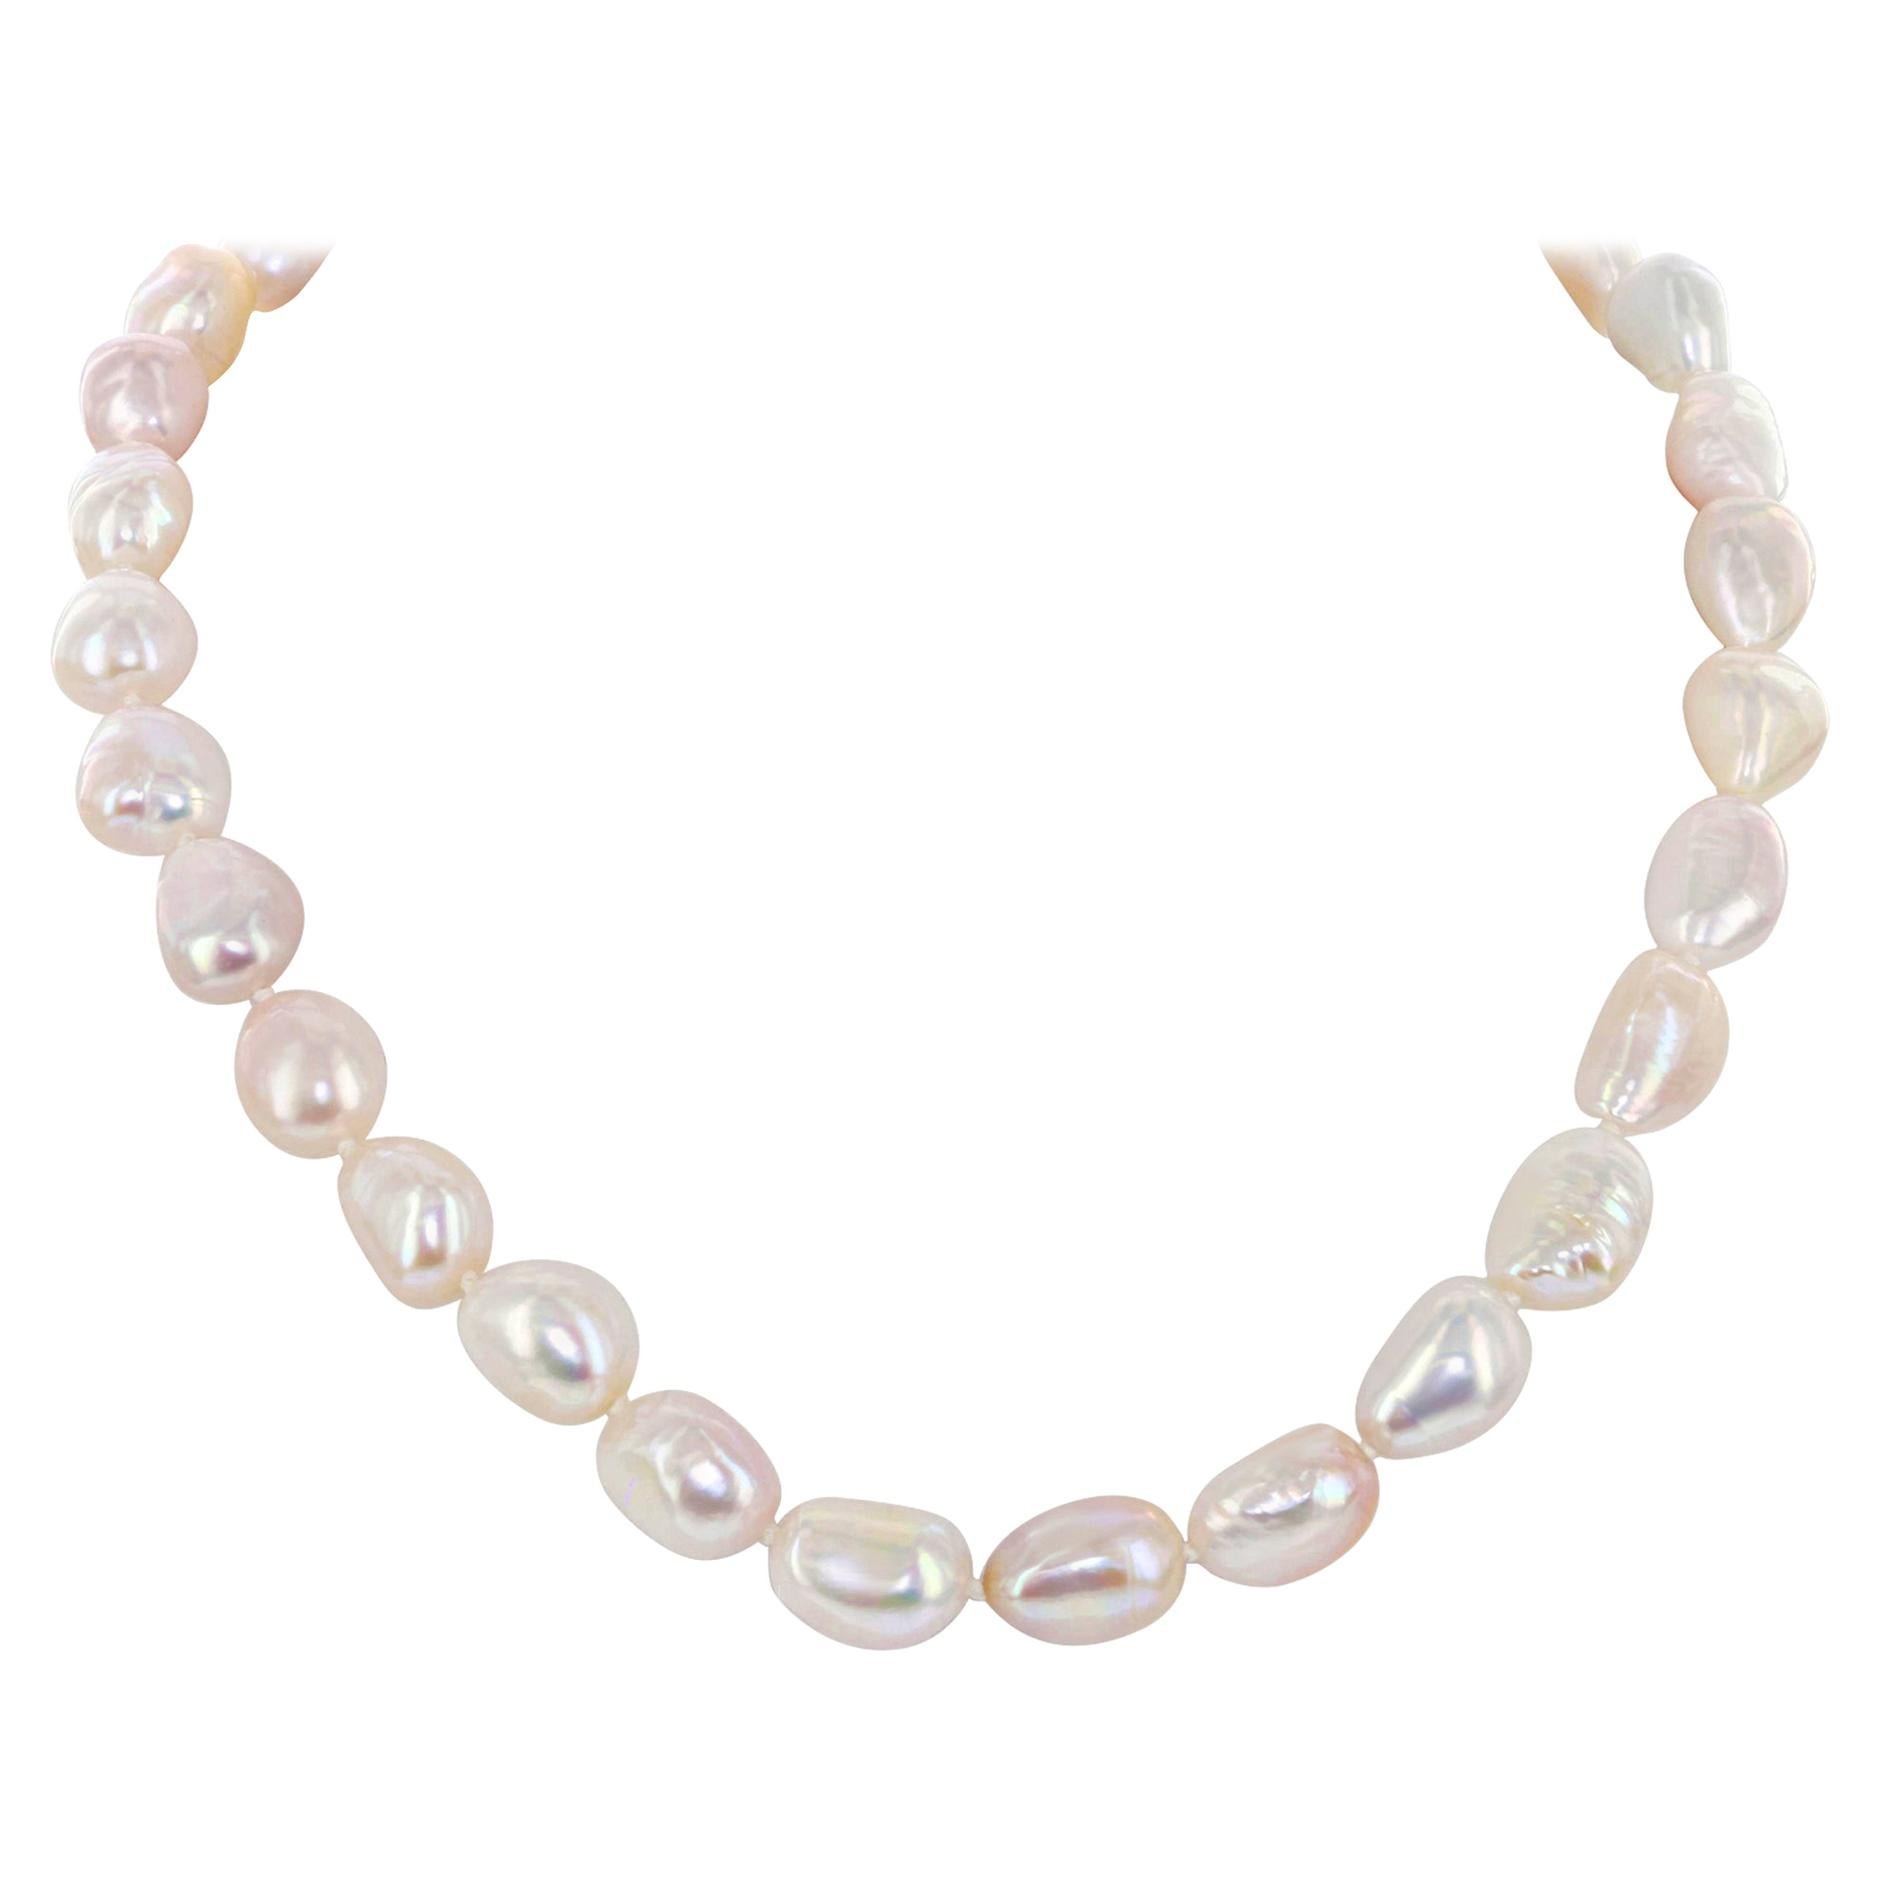 Freshwater White Cultured Pearl Baroque Choker Necklace with Silver Color Clasp